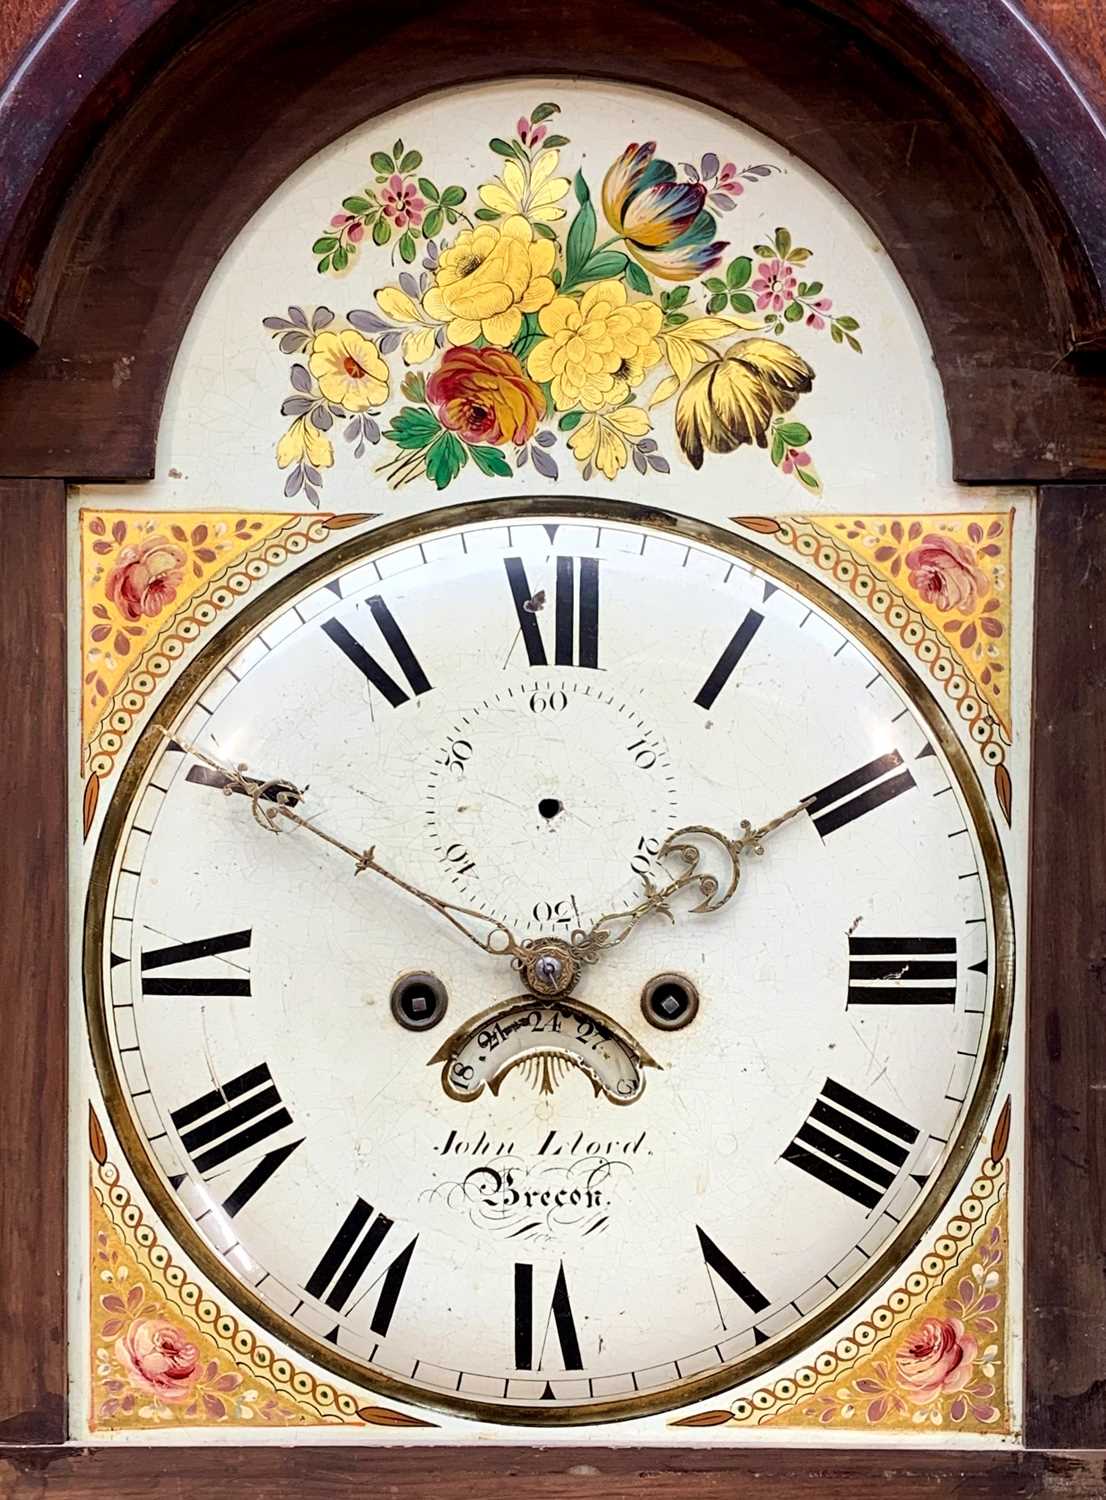 19TH C. WELSH LONGCASE CLOCK, John Lloyd, Brecon, painted Roman dial with rose spandrels and spray - Image 2 of 5